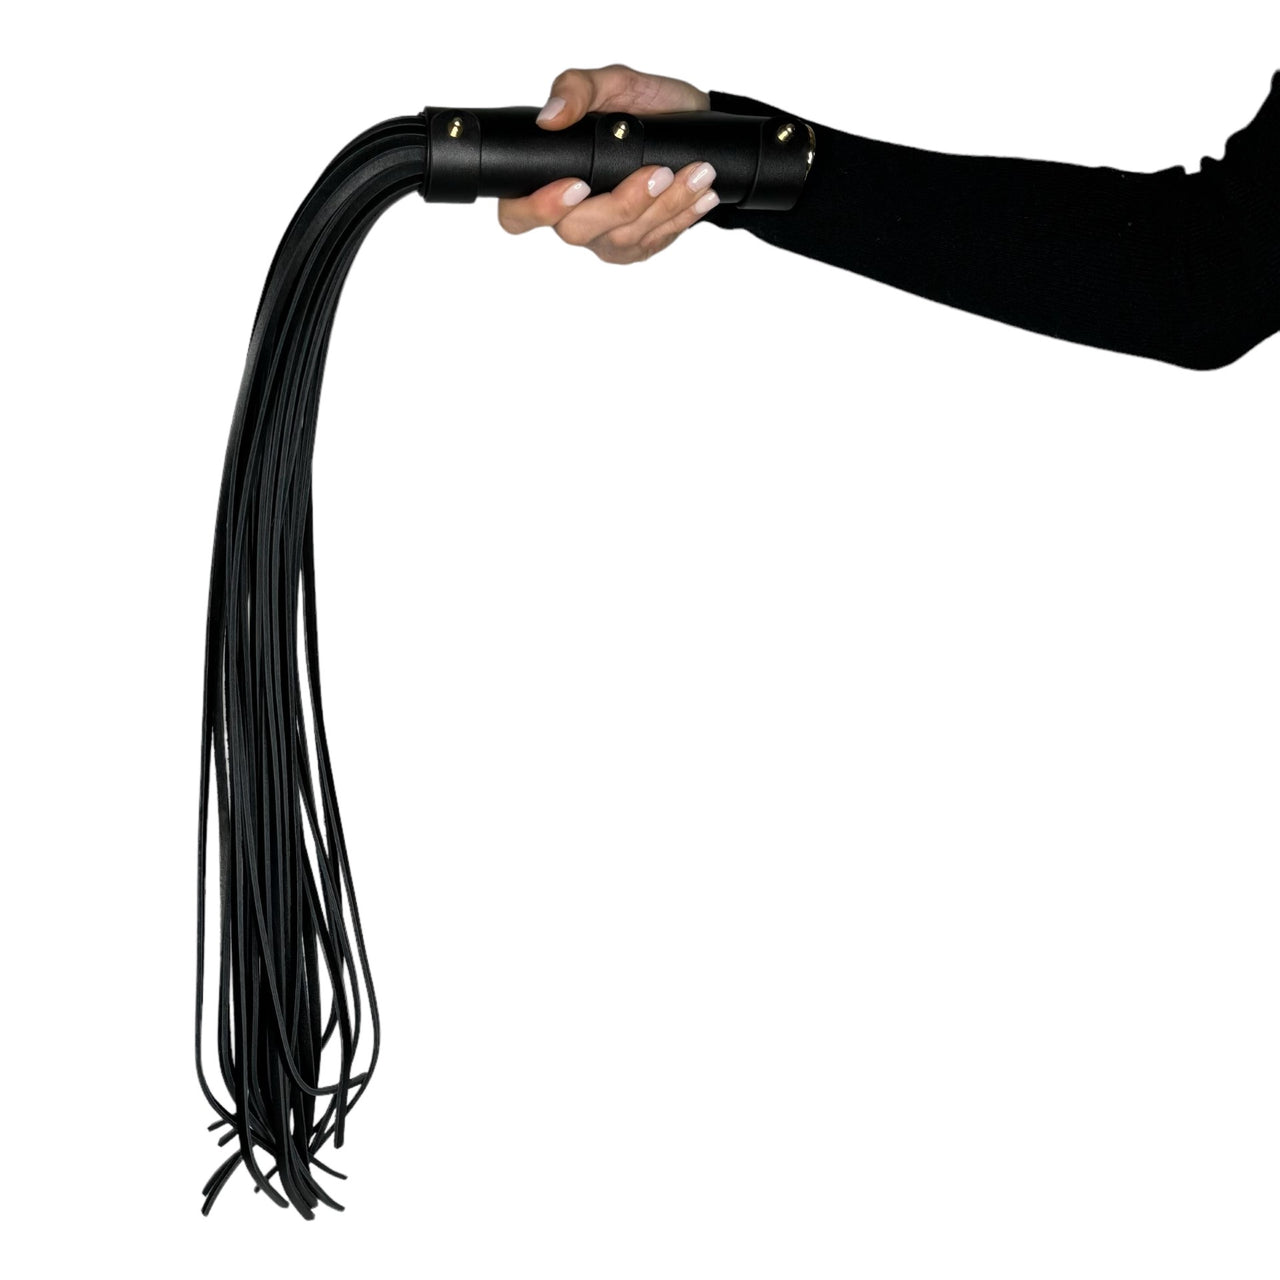 Serious Heavy Duty Leather Braided Flogger Whip with Extended Tassels & Rolled Handle Premium Sensory Play Accessory for Couples